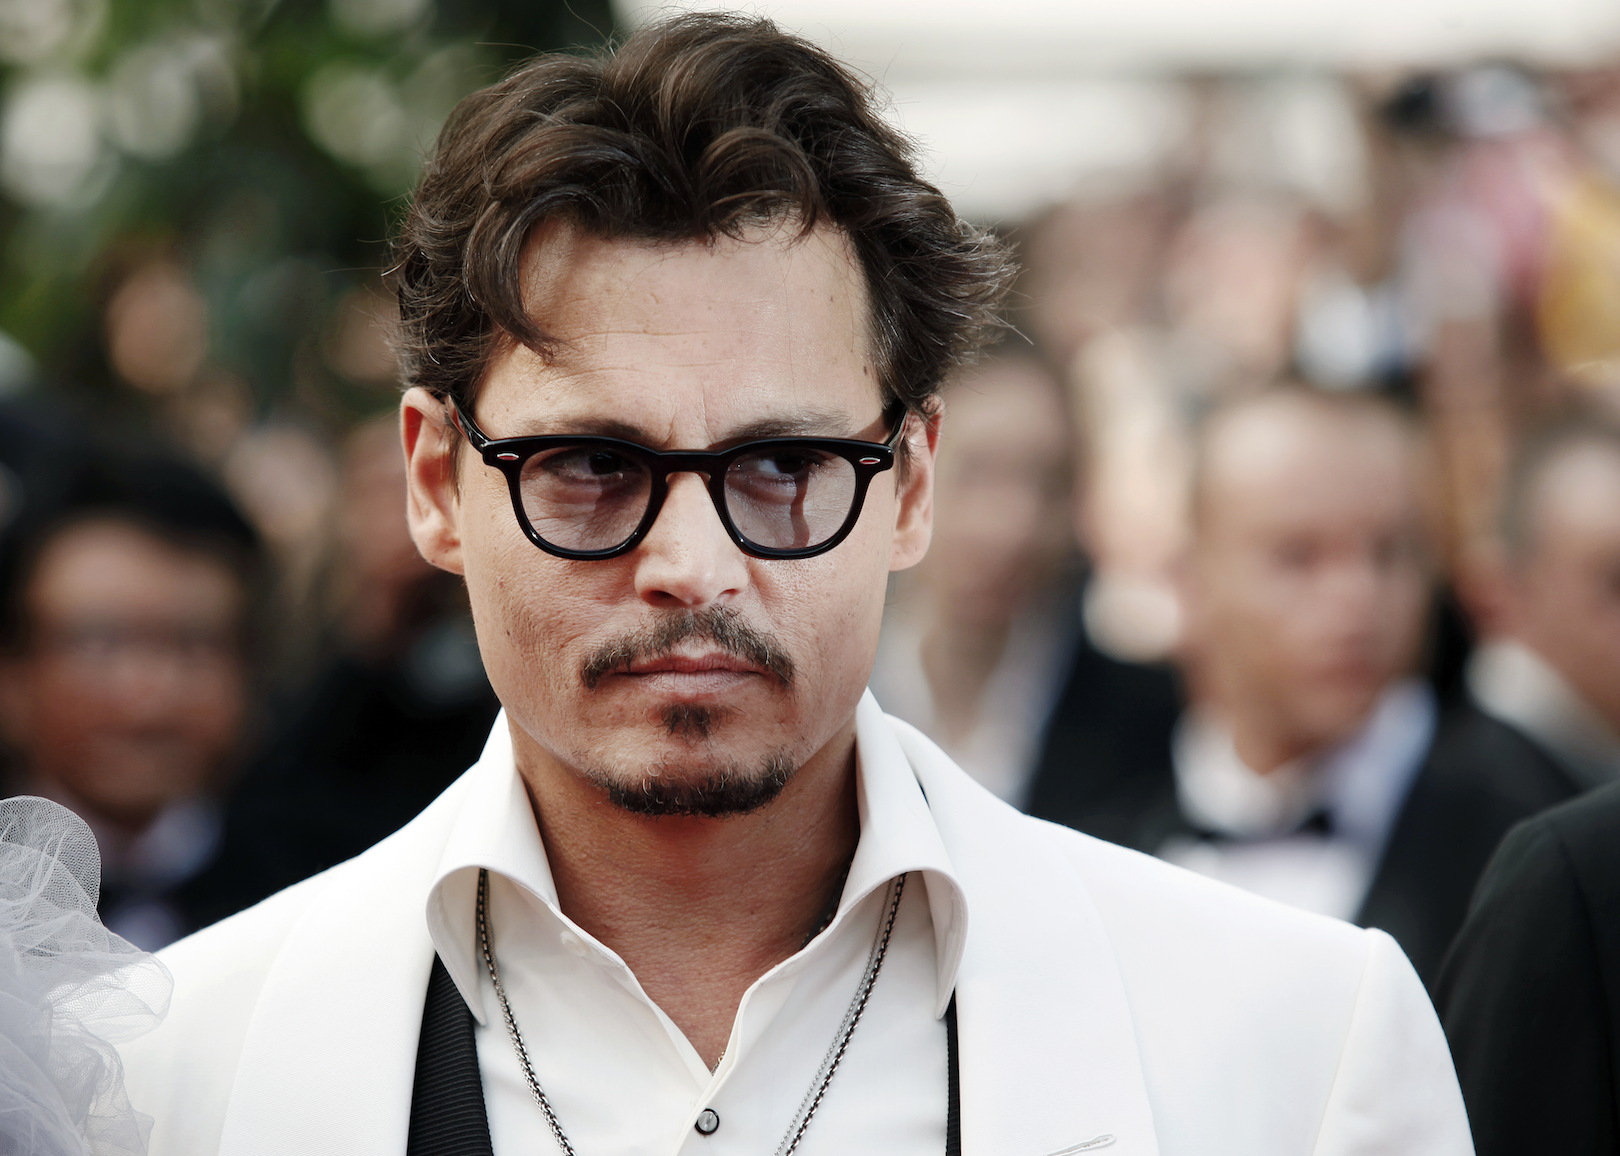 Johnny Depp in a white suit jacket and dark rimmed glasses.